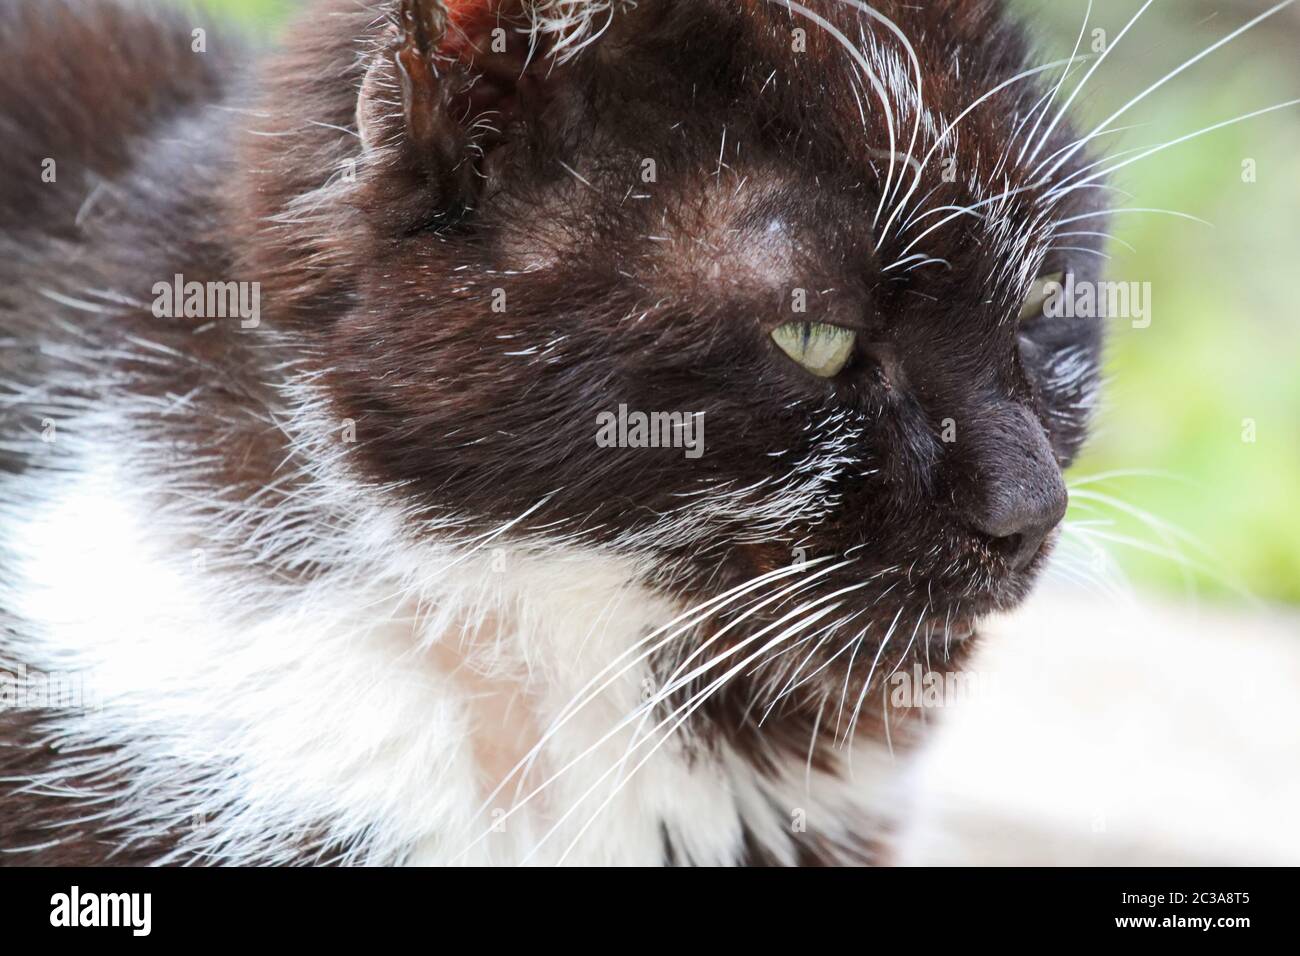 Portrait of a domestic Bicolor or Tuxedo cat outdoors Stock Photo